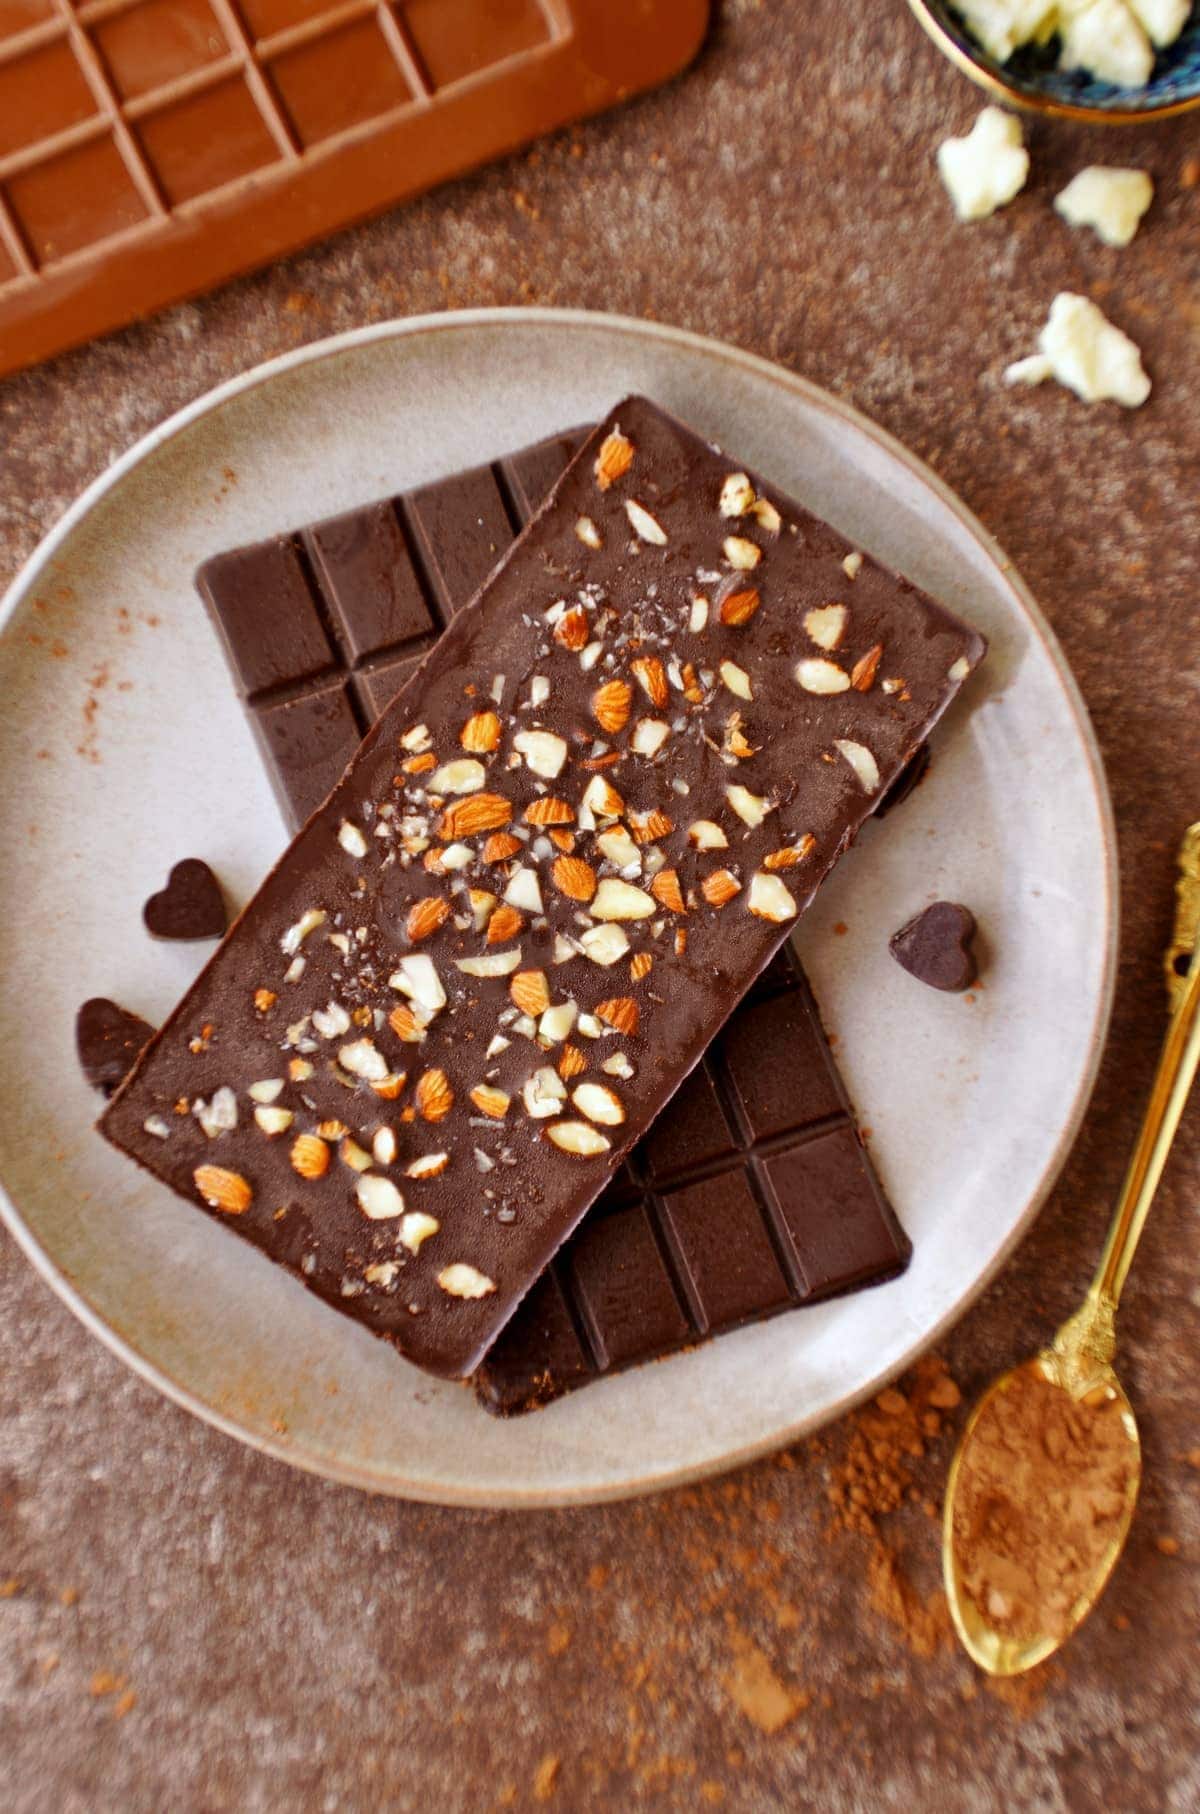 top shot of chocolatey candy bars with almonds